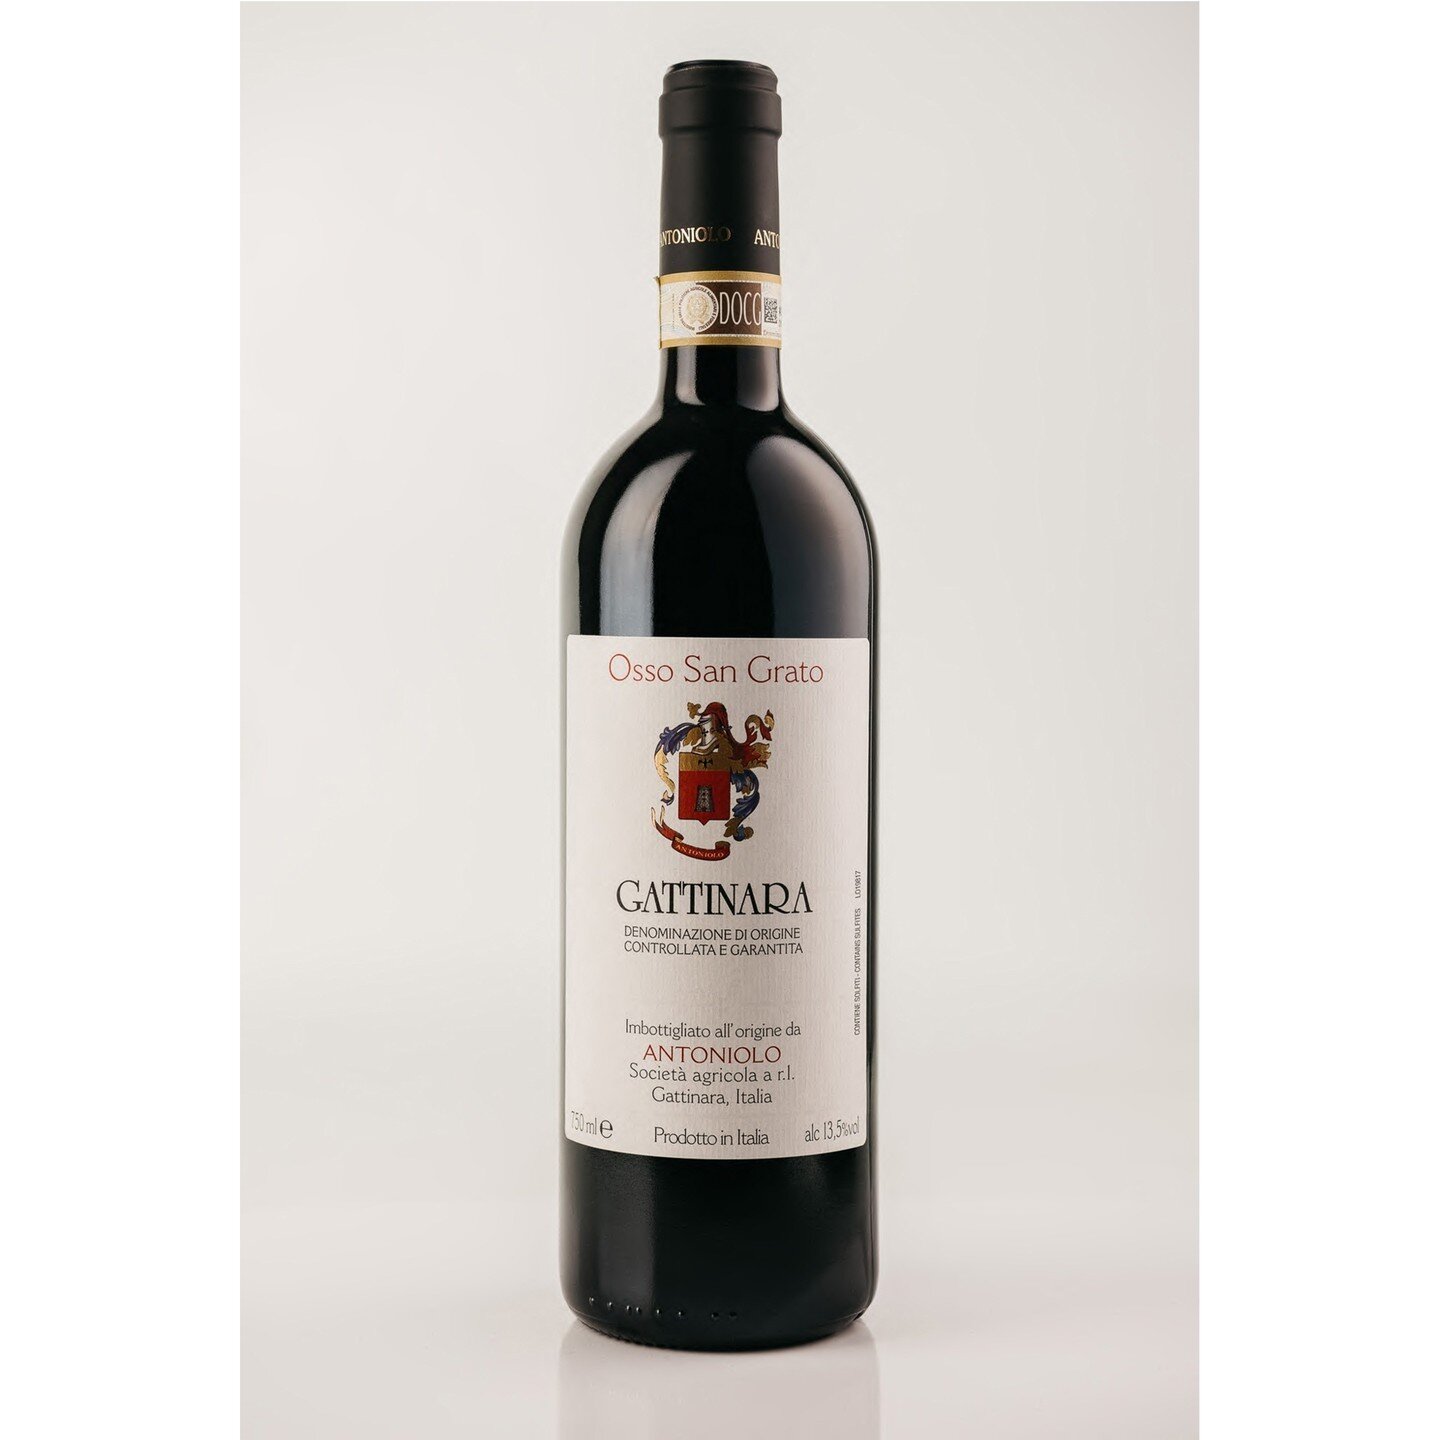 With great pride we present the outstanding 2016 cru wines from Antoniolo, a traditional producer from Gattinara dating back to the 1940s. ⁠
⁠
&quot;𝐀𝐧𝐭𝐨𝐧𝐢𝐨𝐥𝐨 𝐜𝐫𝐮𝐬𝐡𝐞𝐝 𝐢𝐭 𝐰𝐢𝐭𝐡 𝐭𝐡𝐞𝐢𝐫 𝟐𝟎𝟏𝟔 𝐆𝐚𝐭𝐭𝐢𝐧𝐚𝐫𝐚𝐬. 𝐓𝐡𝐞 𝐰𝐢